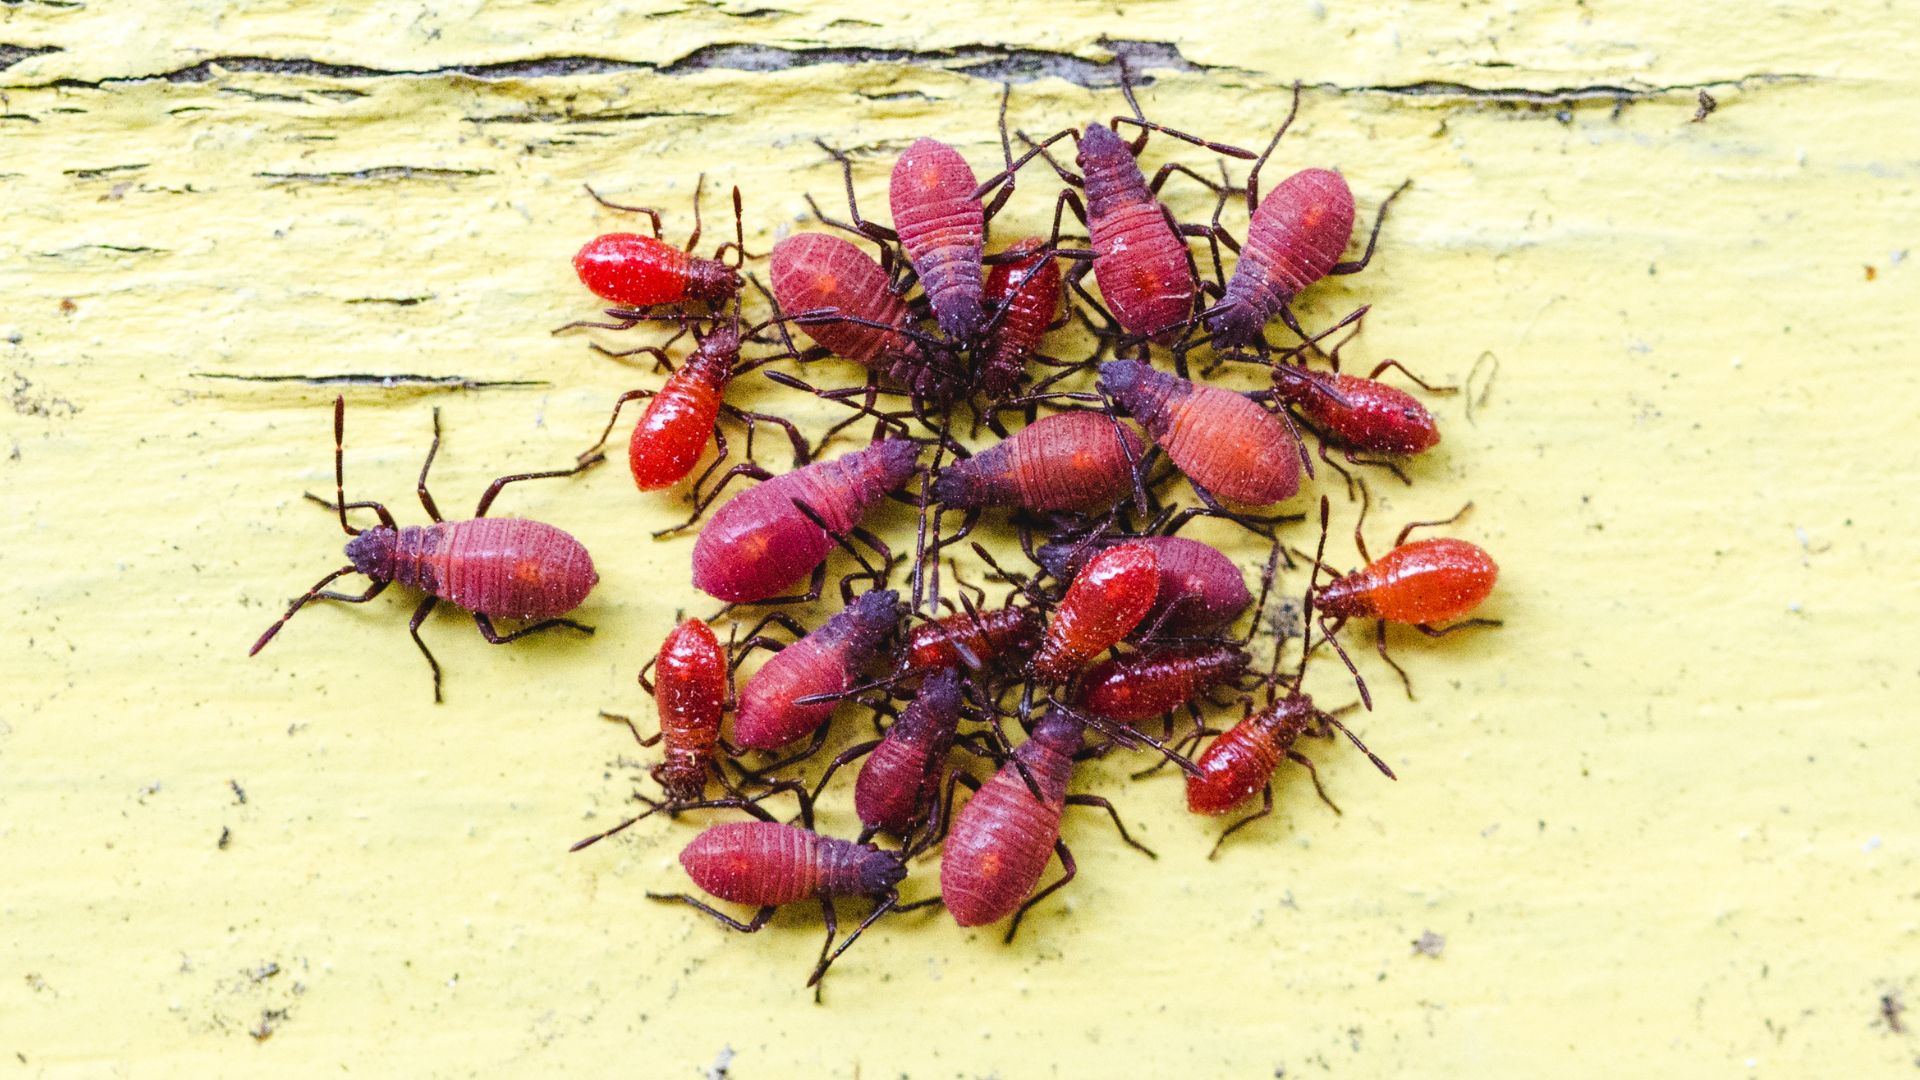 An image of boxelder nymphs on a yellow painted wooden surface.